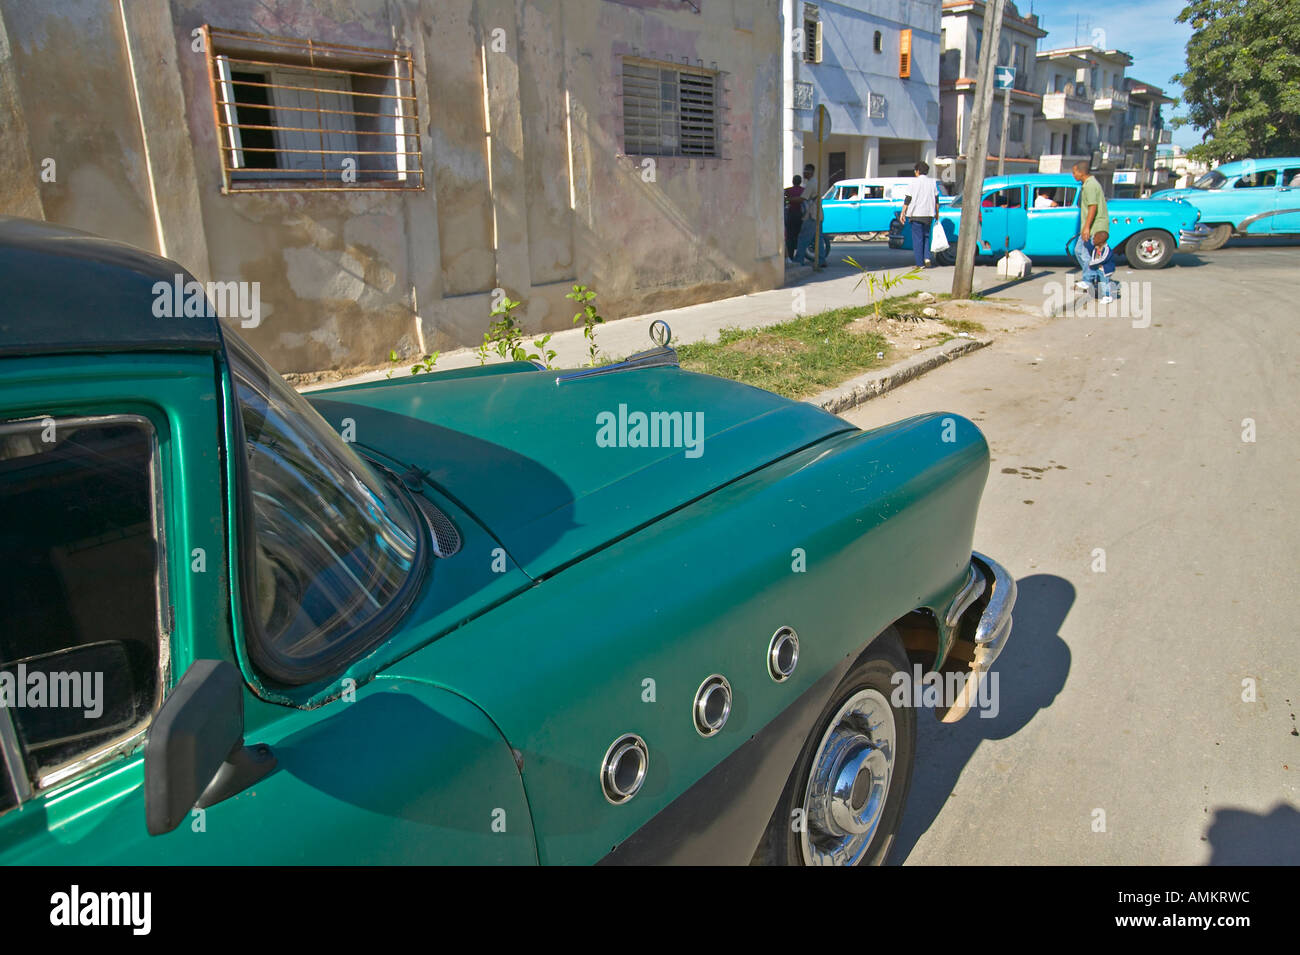 Old 1955 Buick parked with other old cars in distance of Havana Cuba Stock Photo